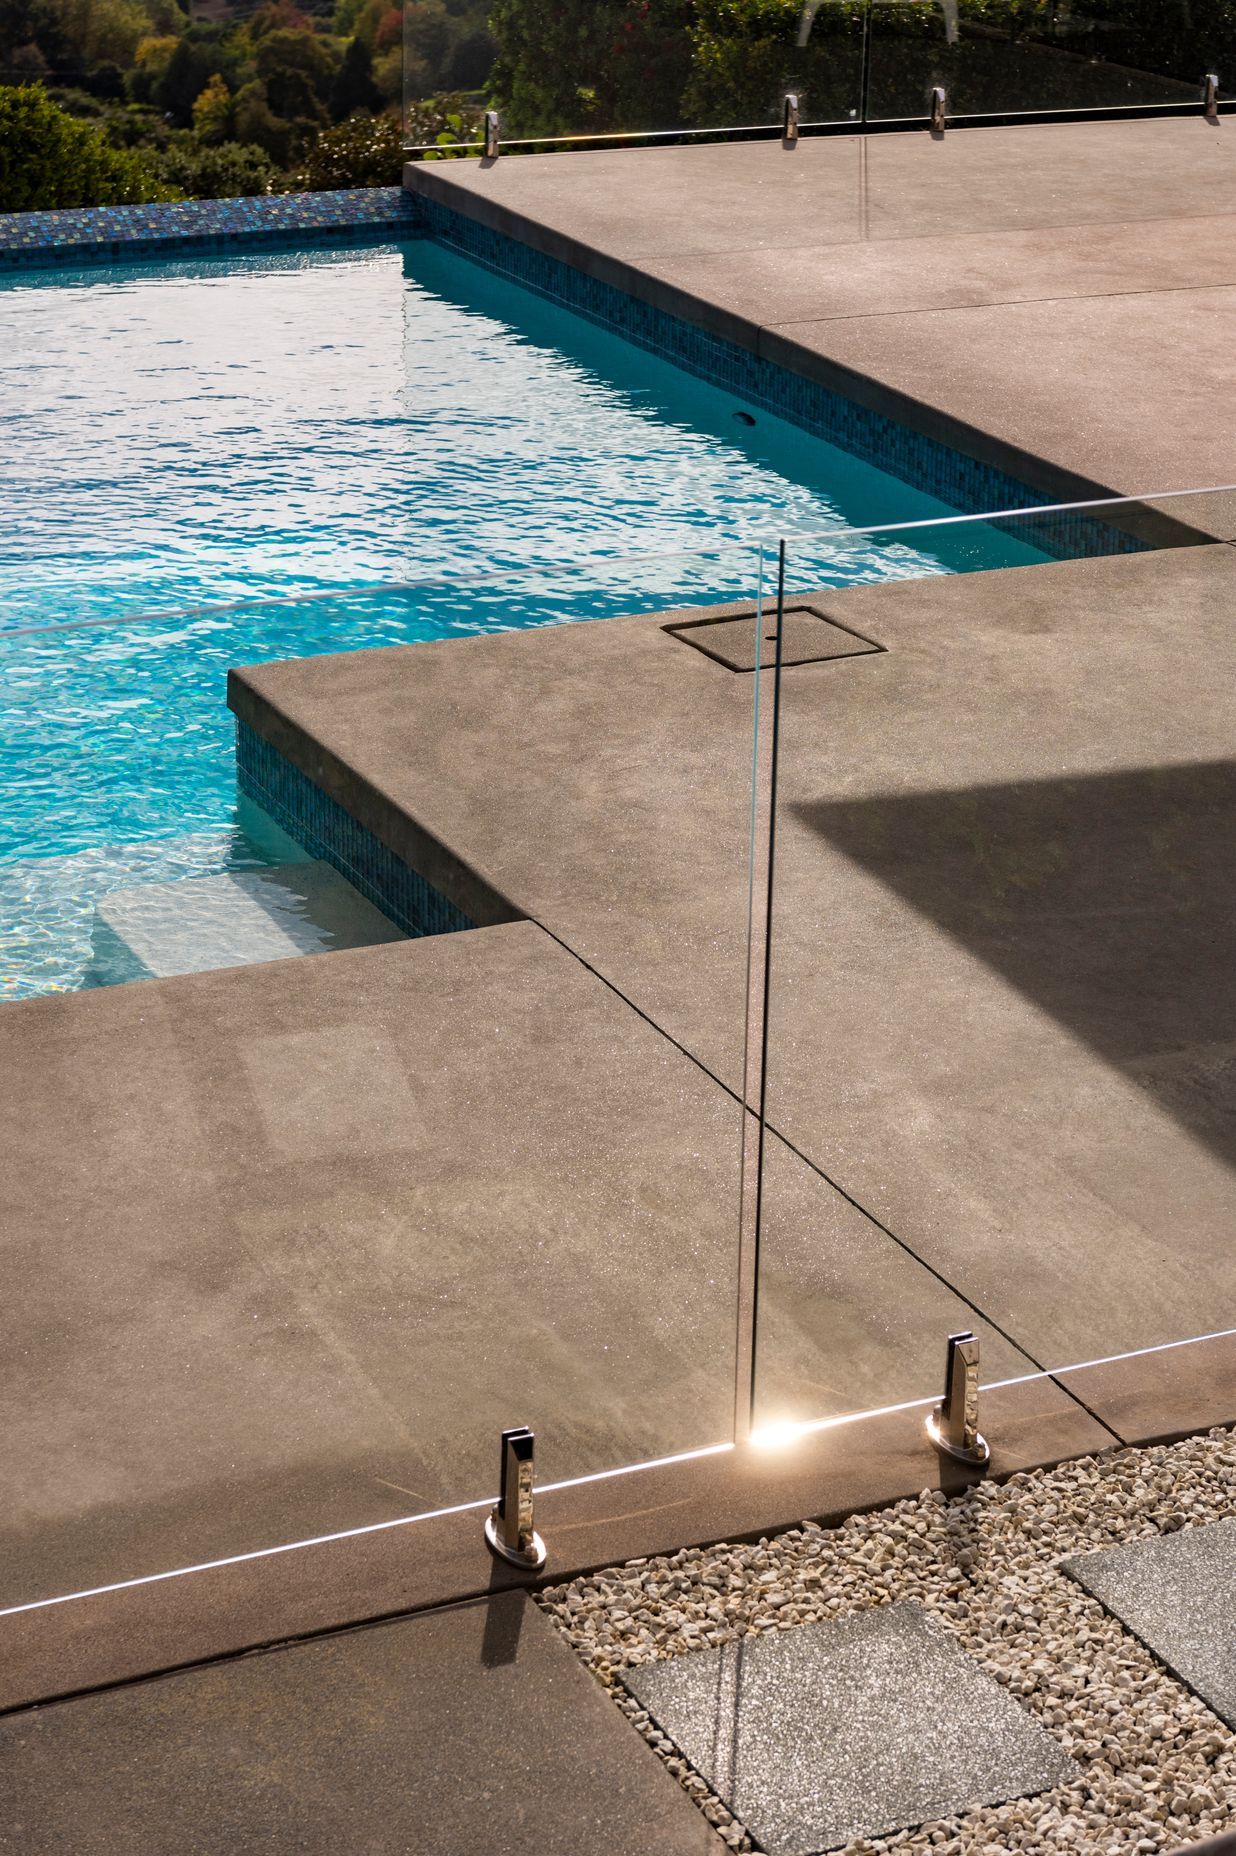 The homeowner opted for a poured concrete finish right to the pool edge